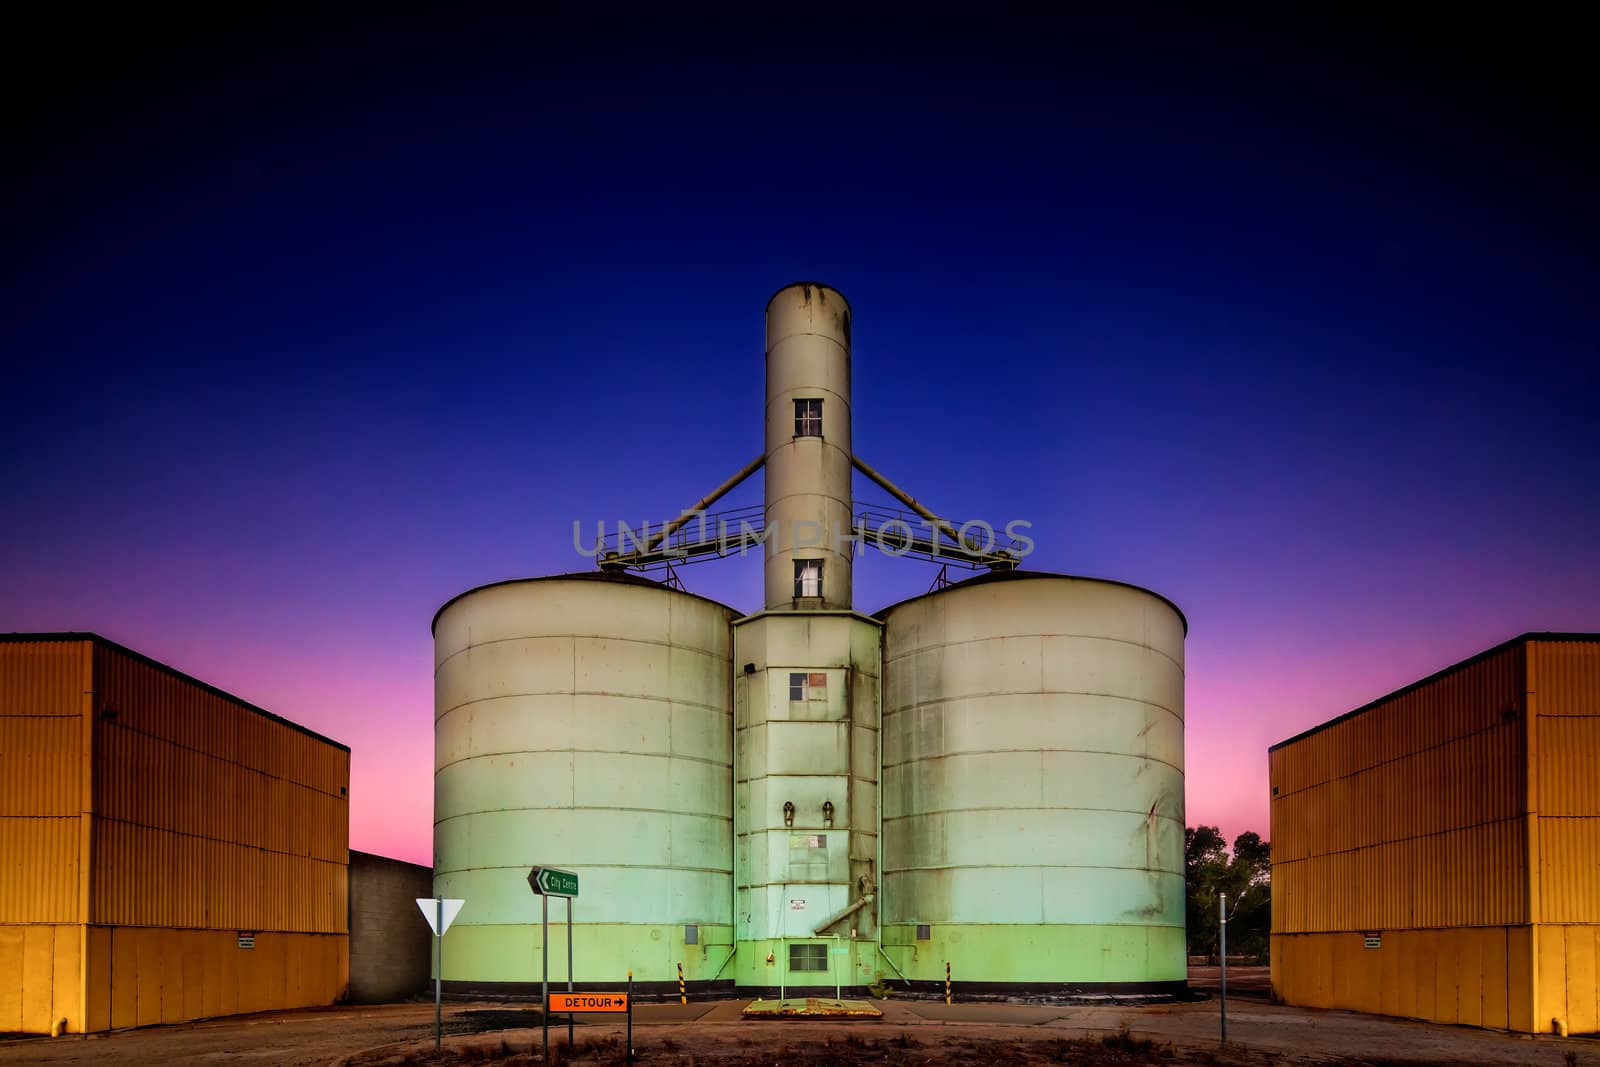 Old grain storage rustic silo during a stunning pink purple blue dusk sunset in country Victoria of Australia